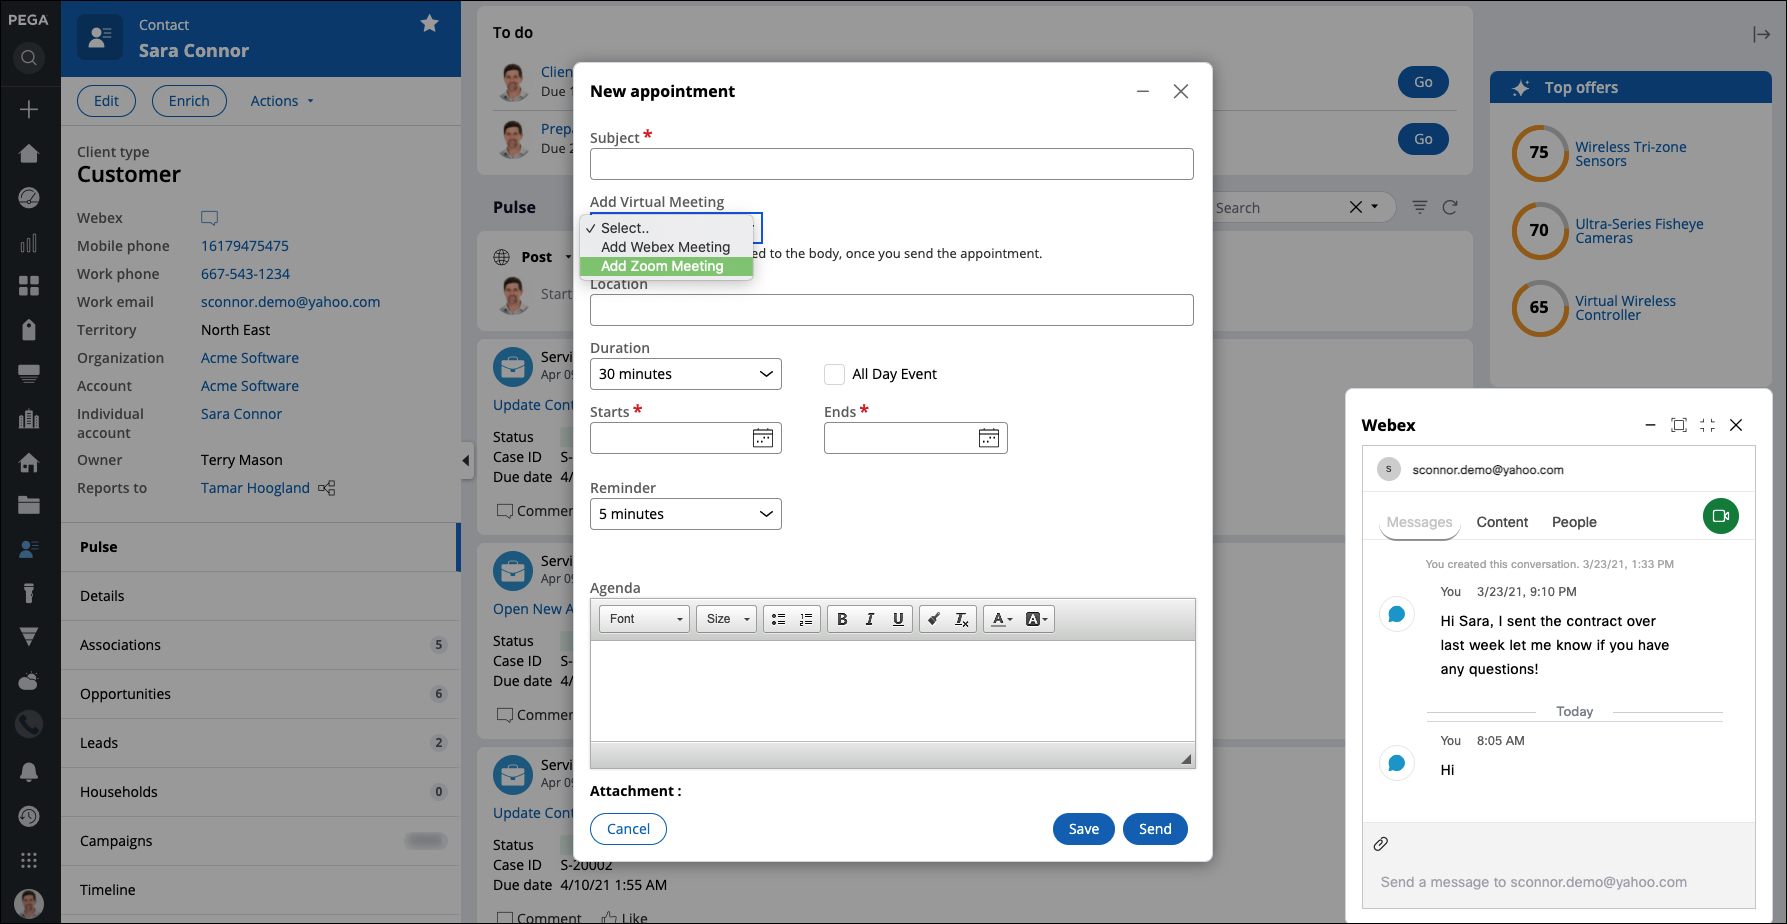 Cisco Webex and Zoom integration in Pega Sales Automation